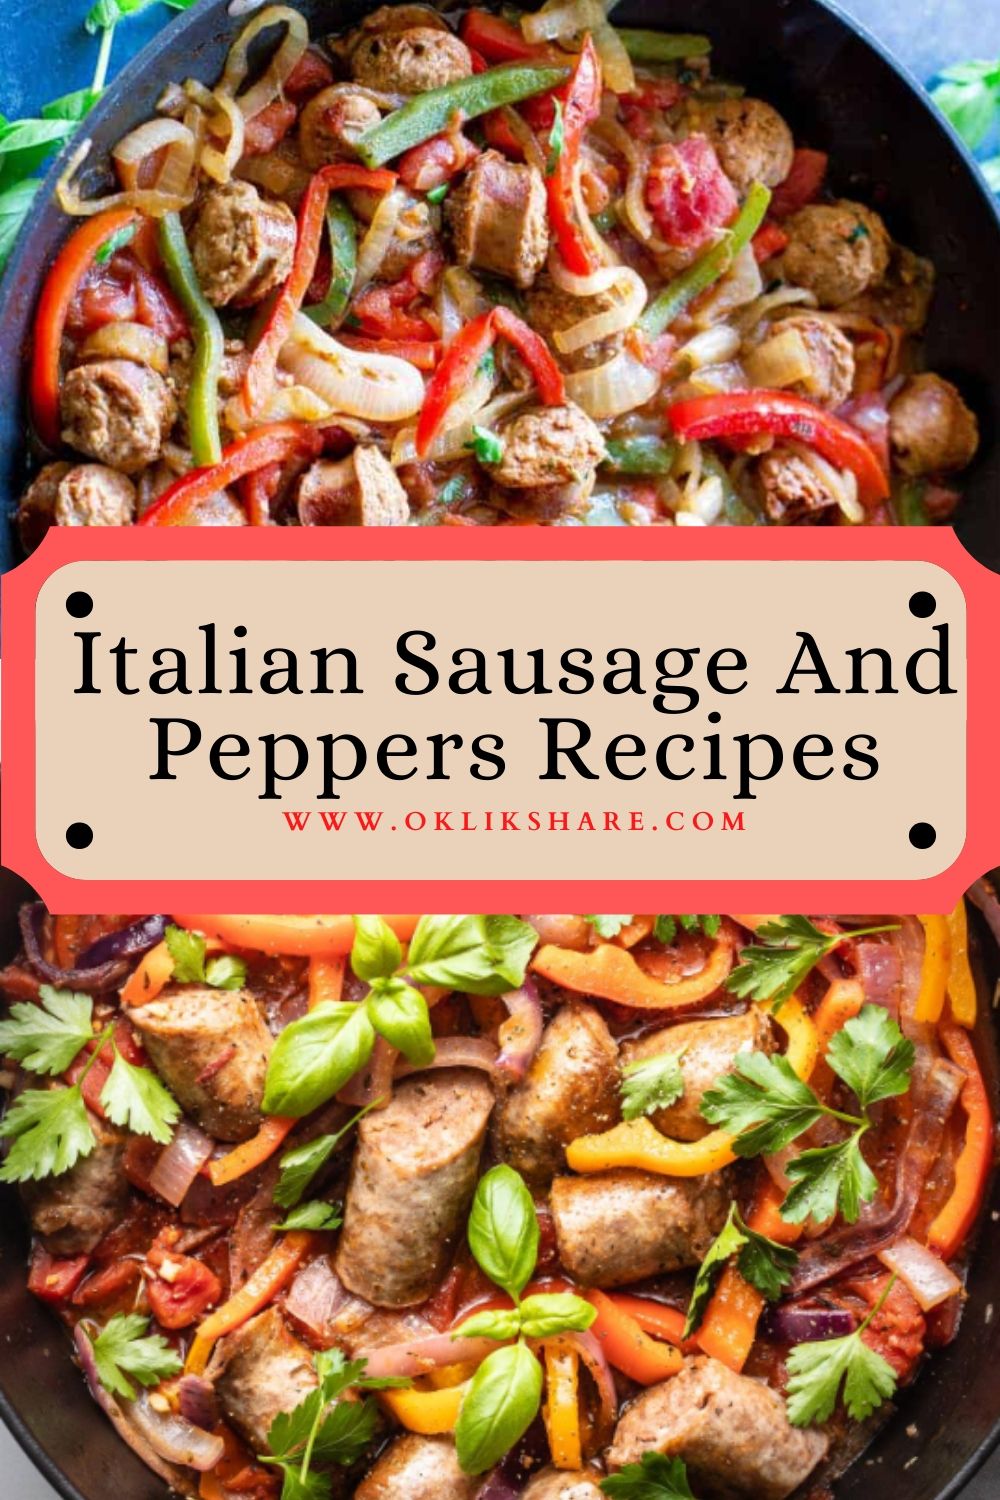 Italian Sausage And Peppers Recipes